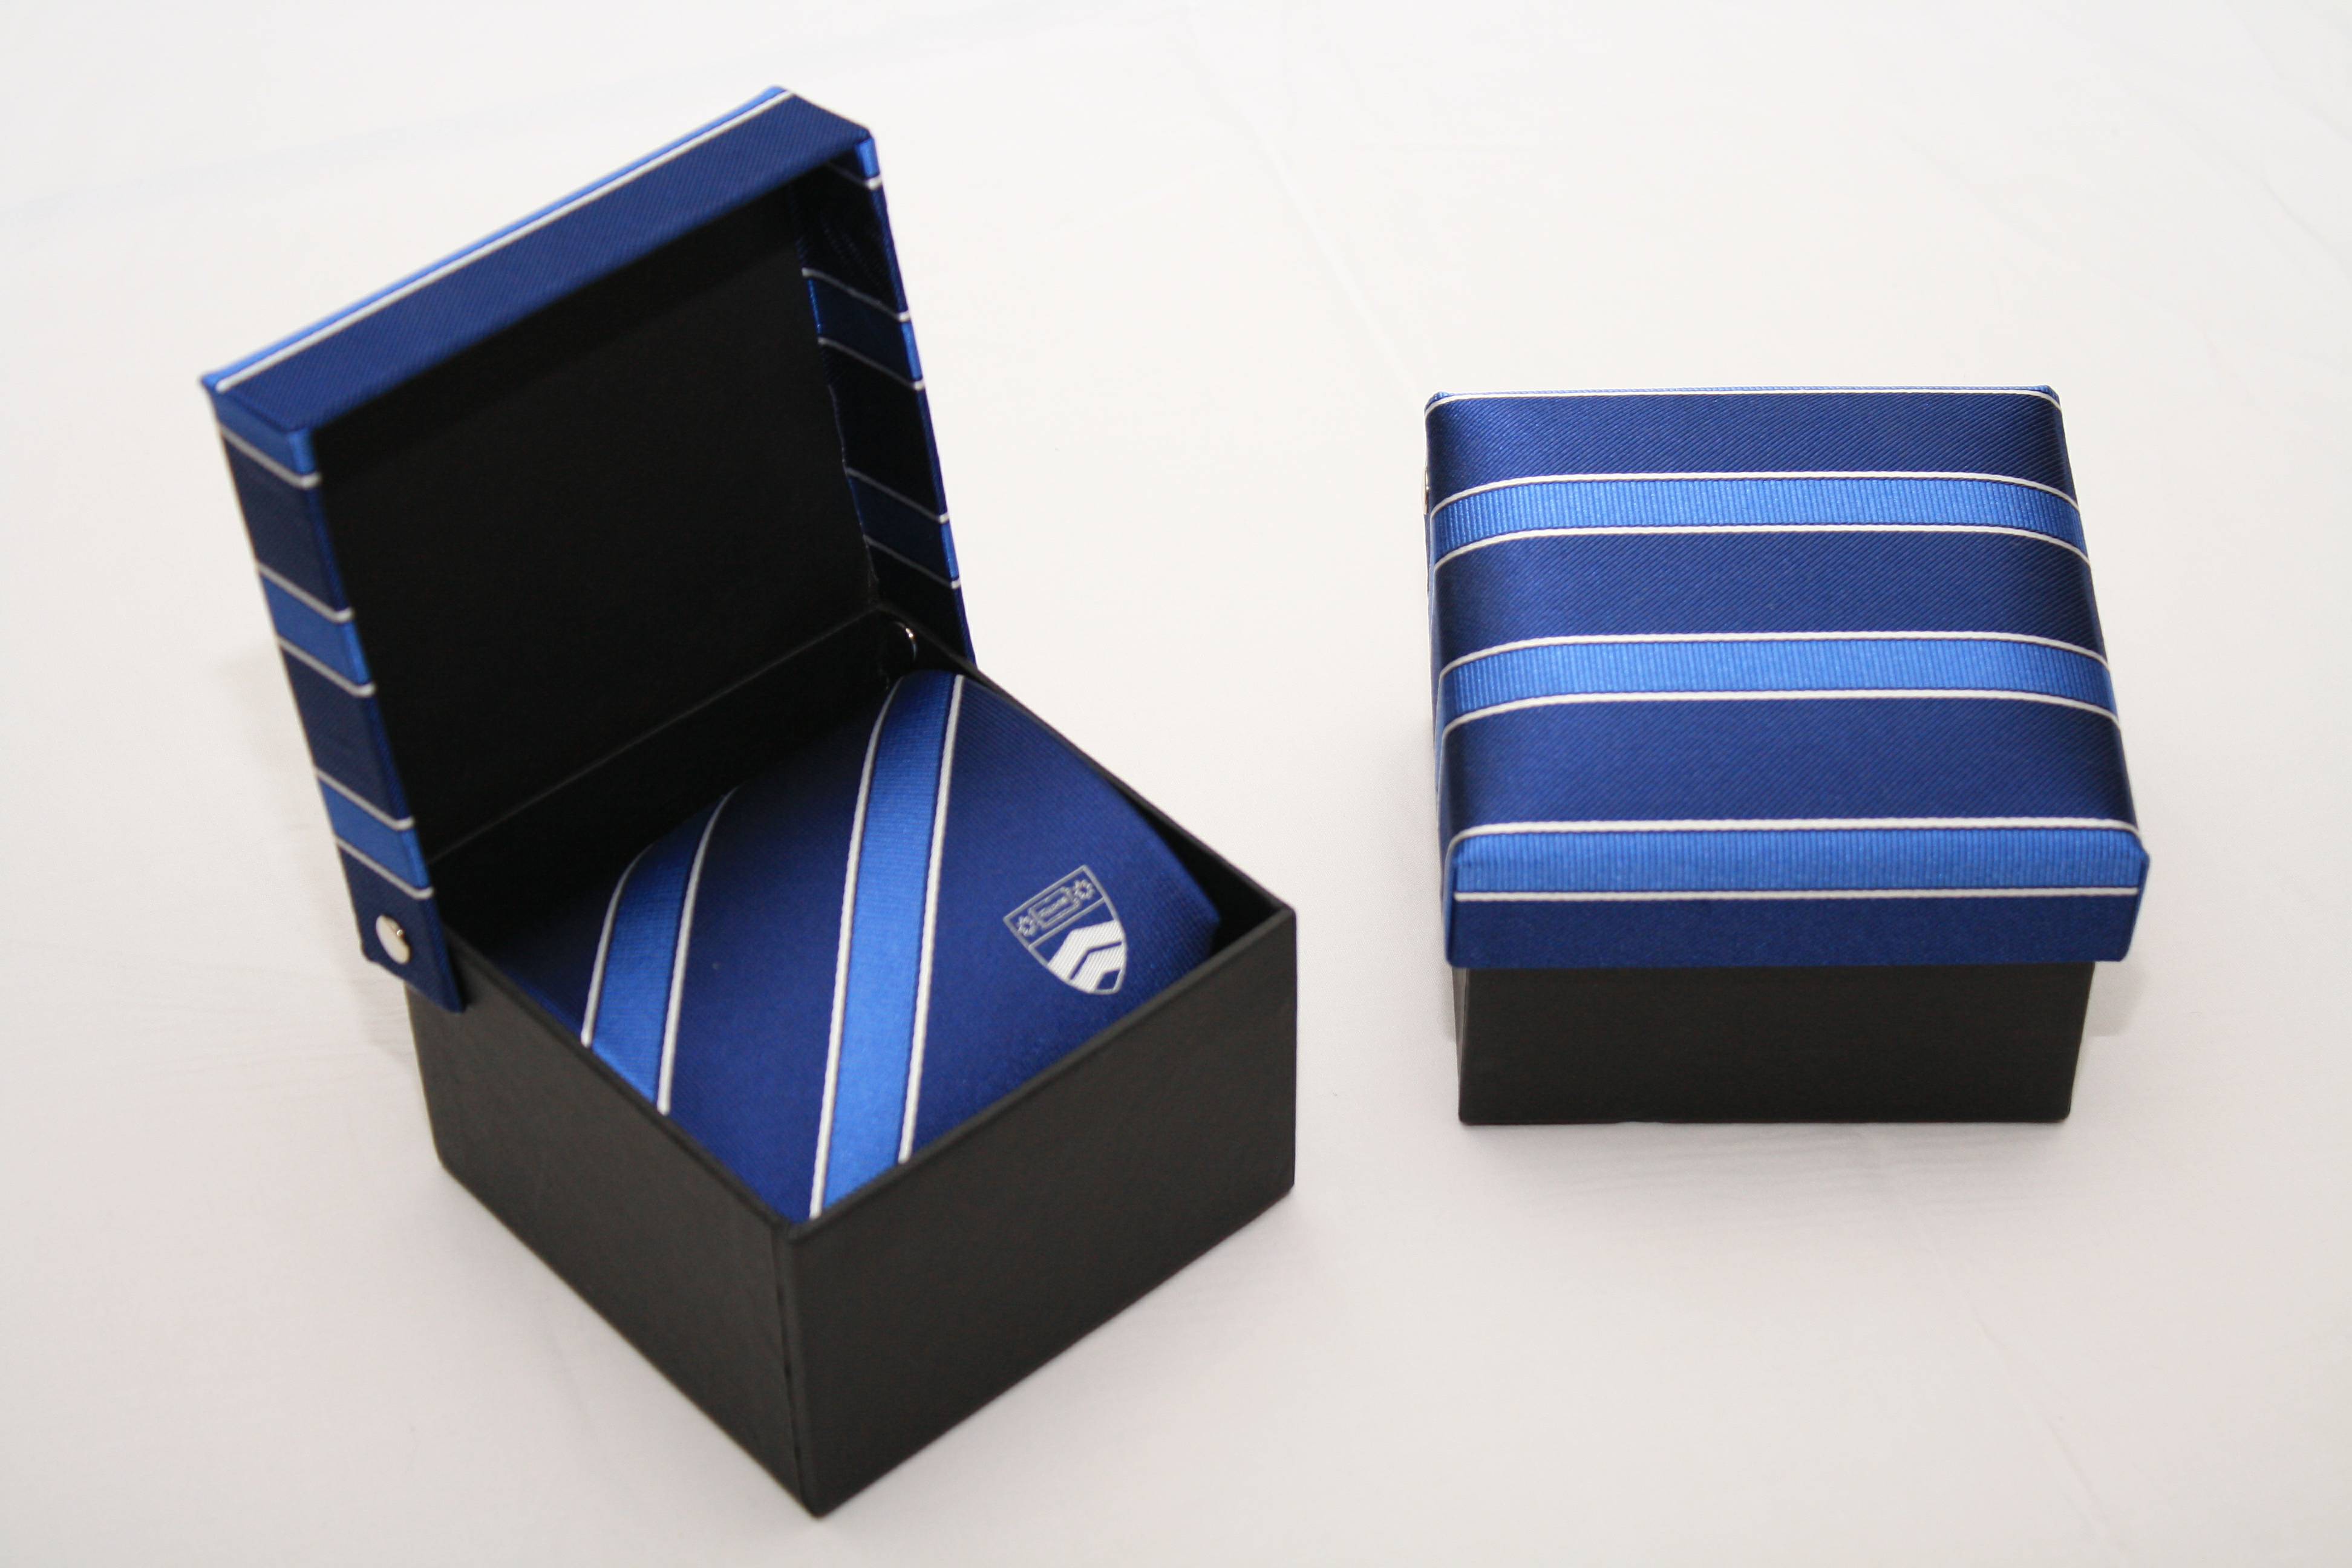 New College ties in box